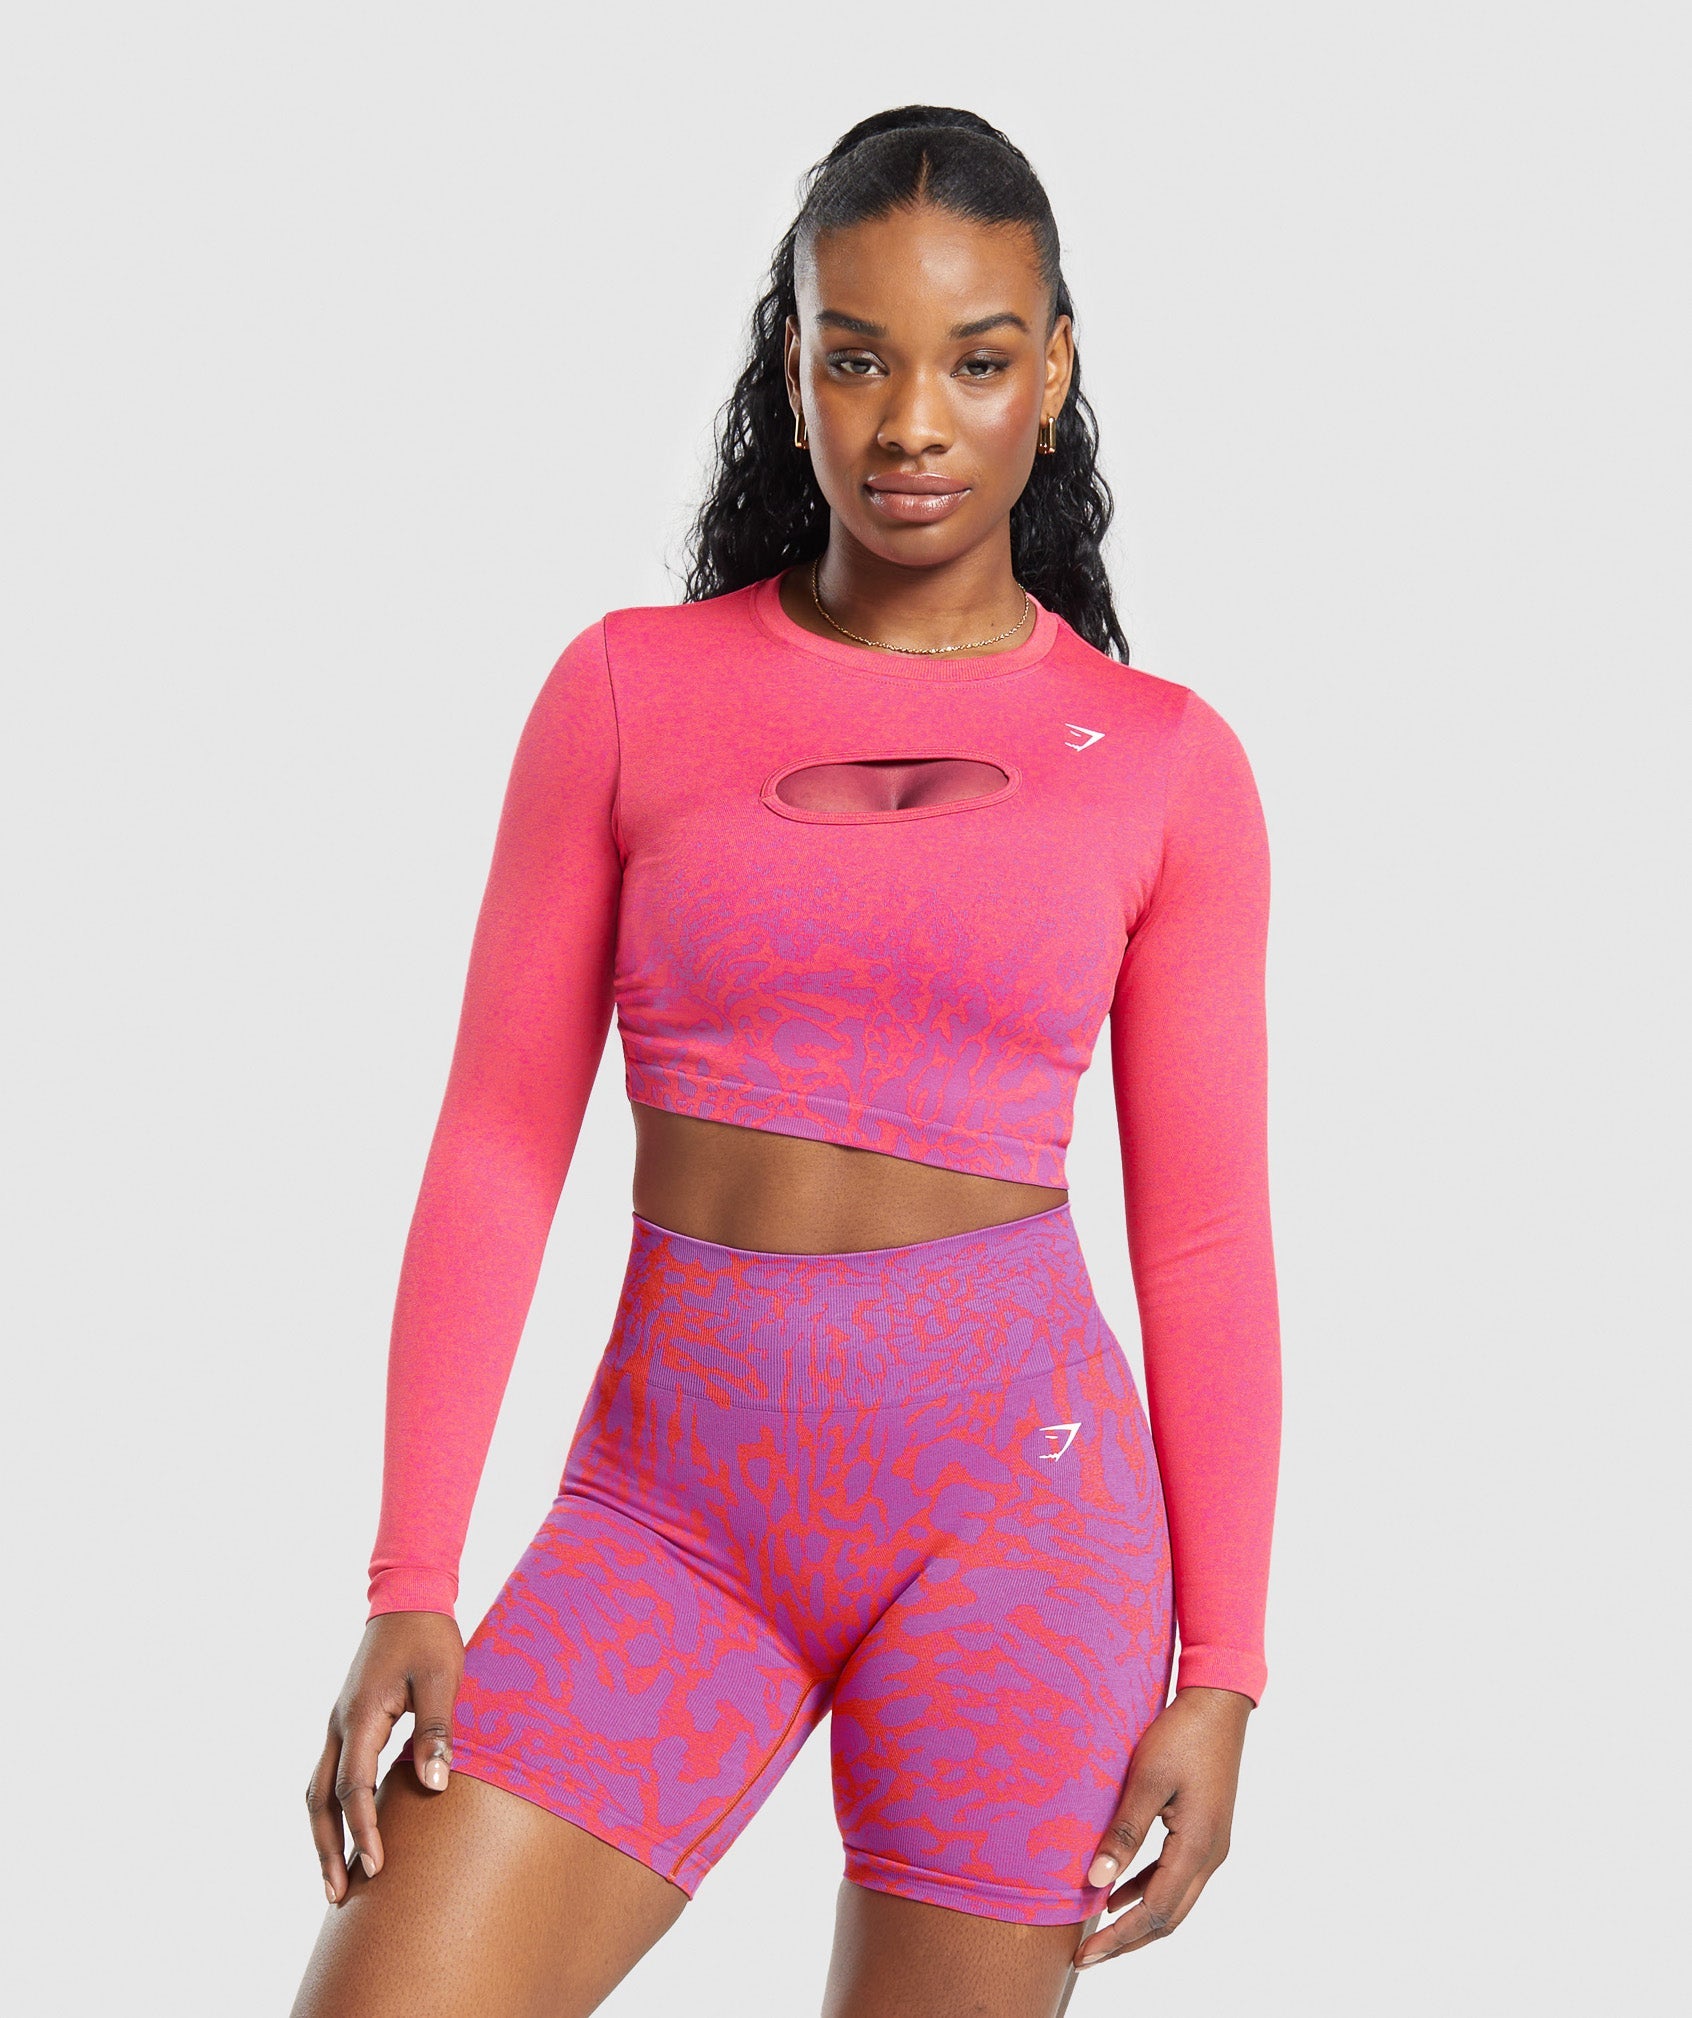 Adapt Safari Seamless Faded Long Sleeve Top in Shelly Pink/Fly Coral